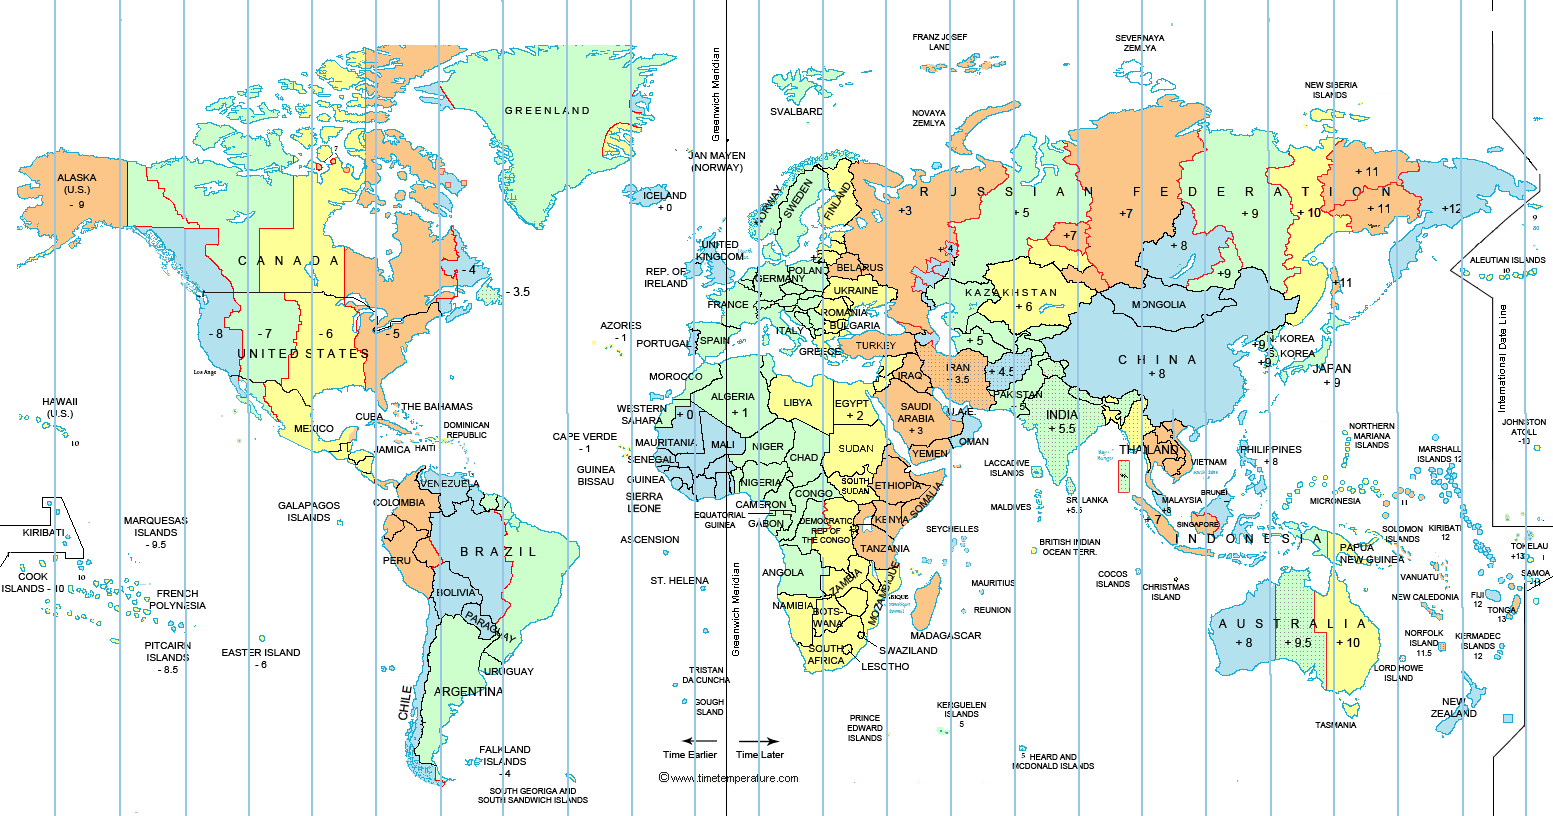 time difference map of world time zones Large World Time Zone Map time difference map of world time zones